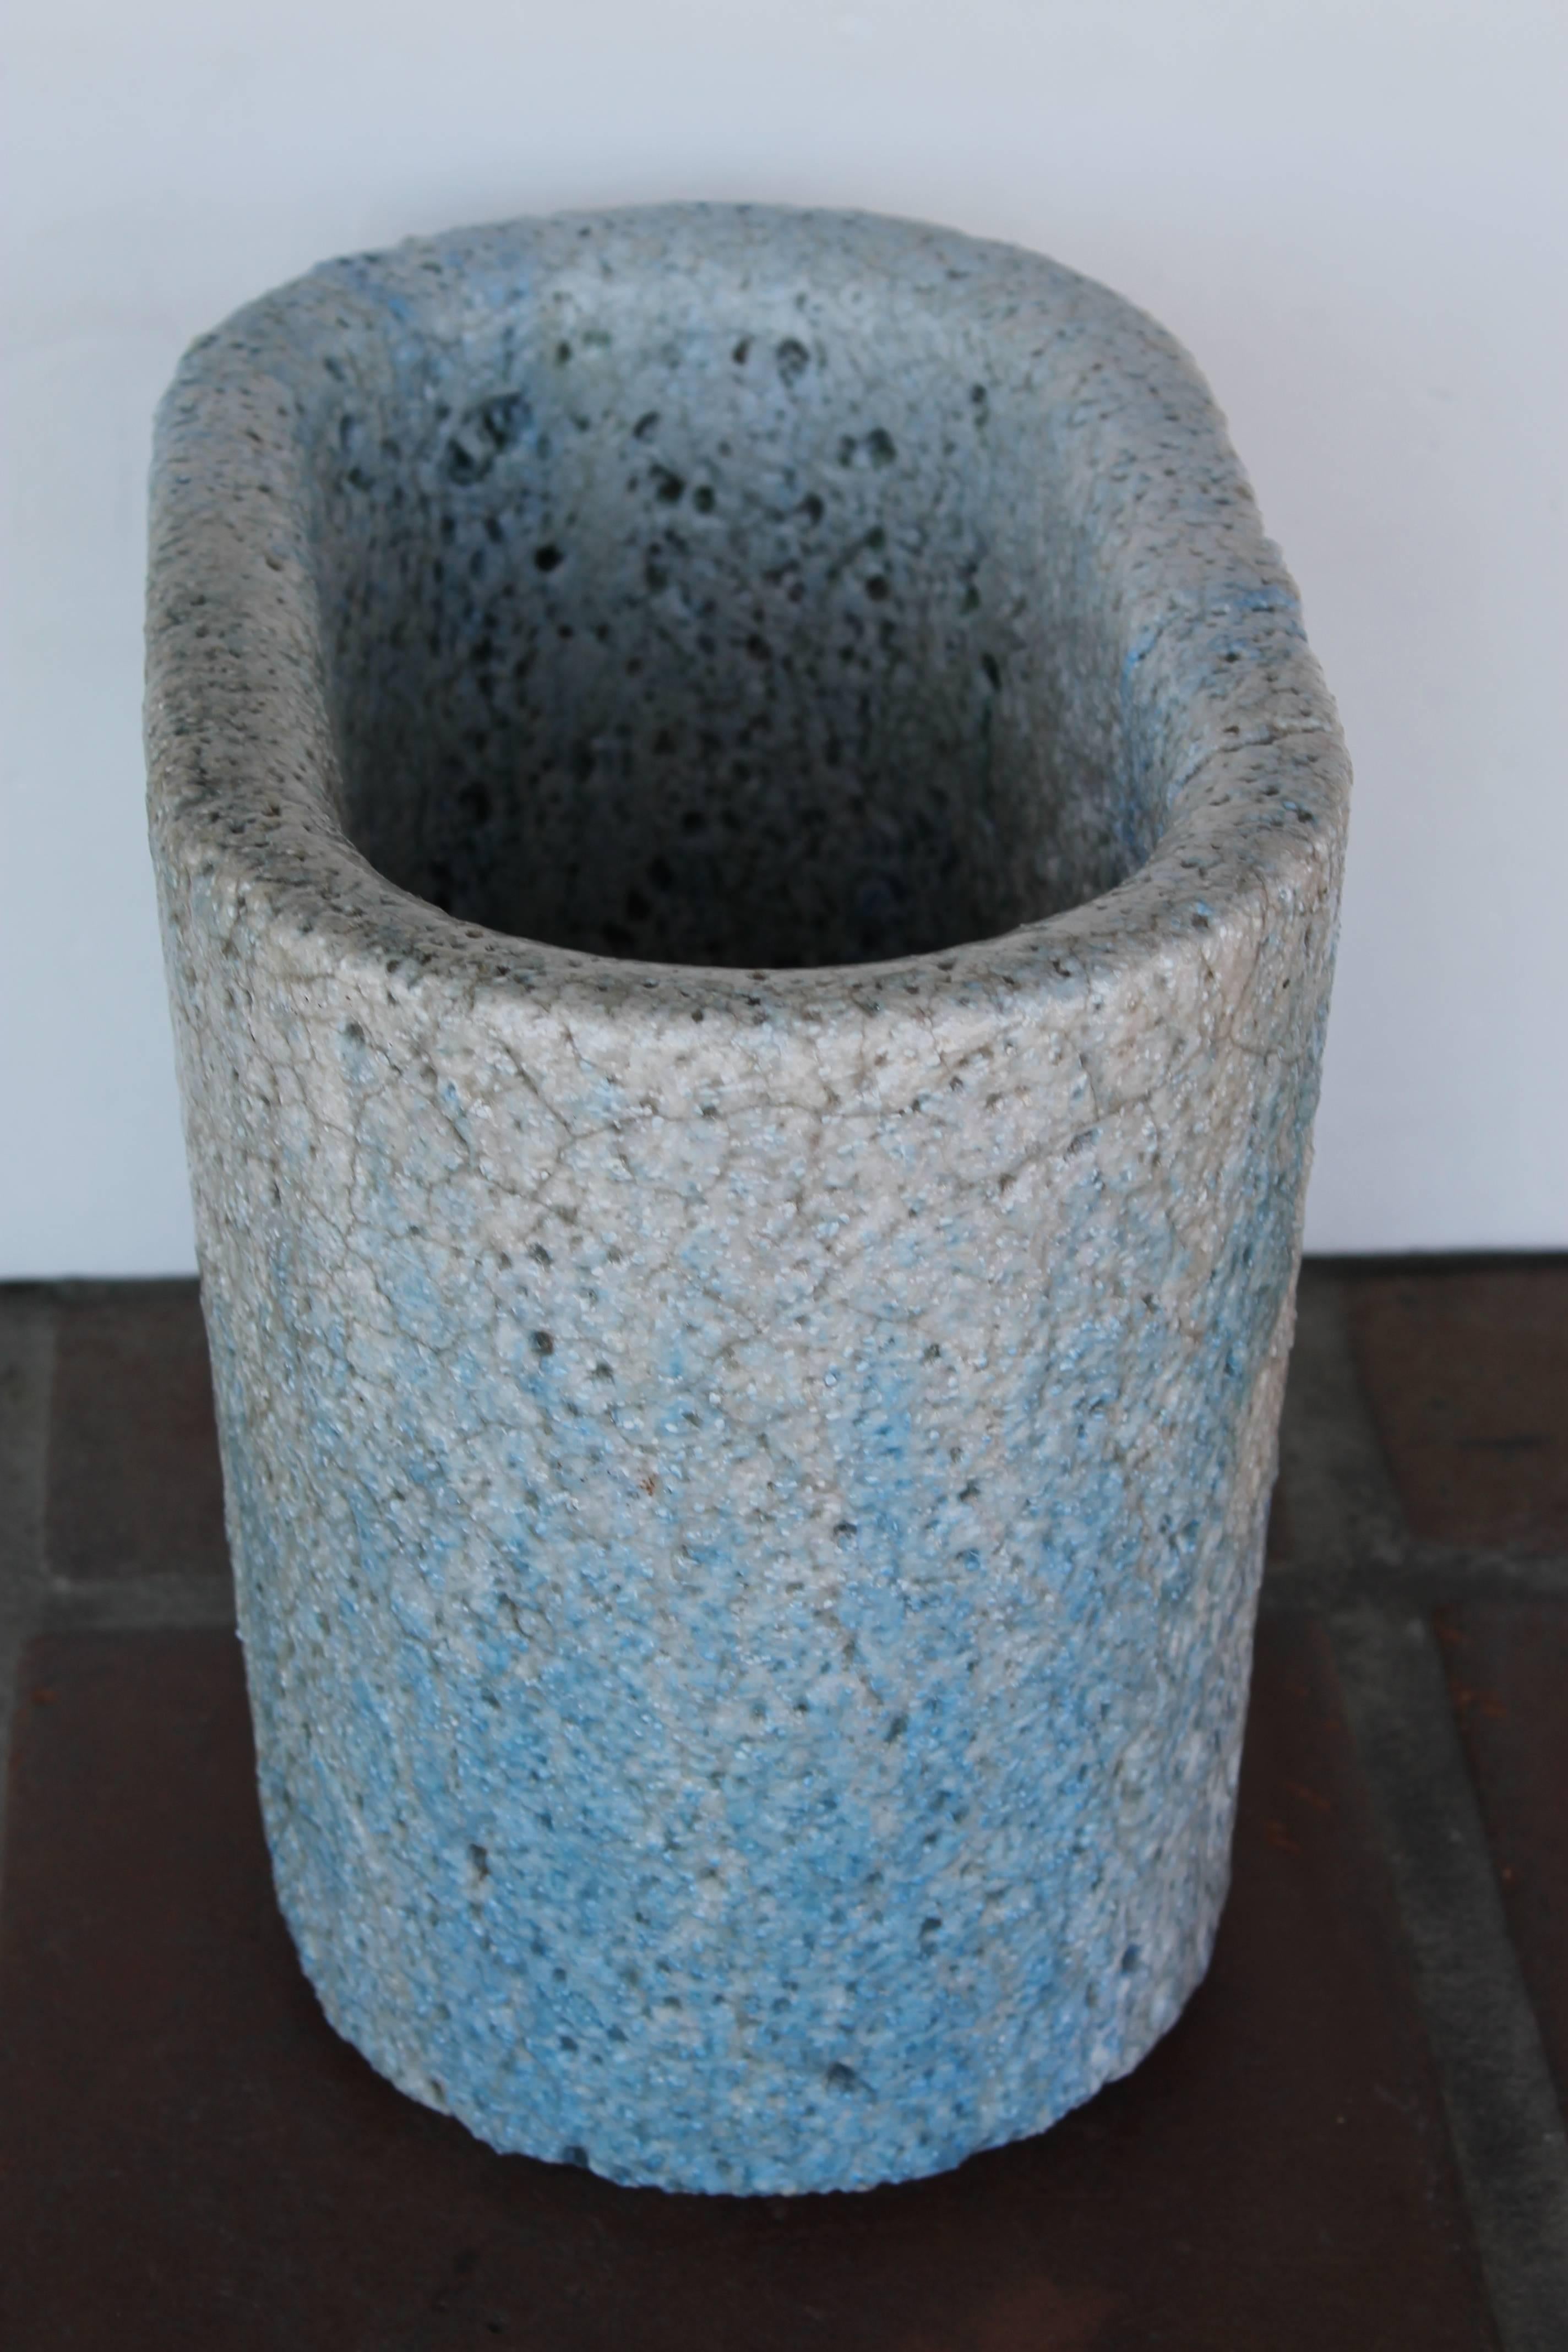 Salvaged from a now defunct glass manufacturer, this solid porcelain Crucible is heavily encrusted with many years of glass drippings, creating the marvellously textured and colorful surface you see here. Shades of pale blue, grey and white